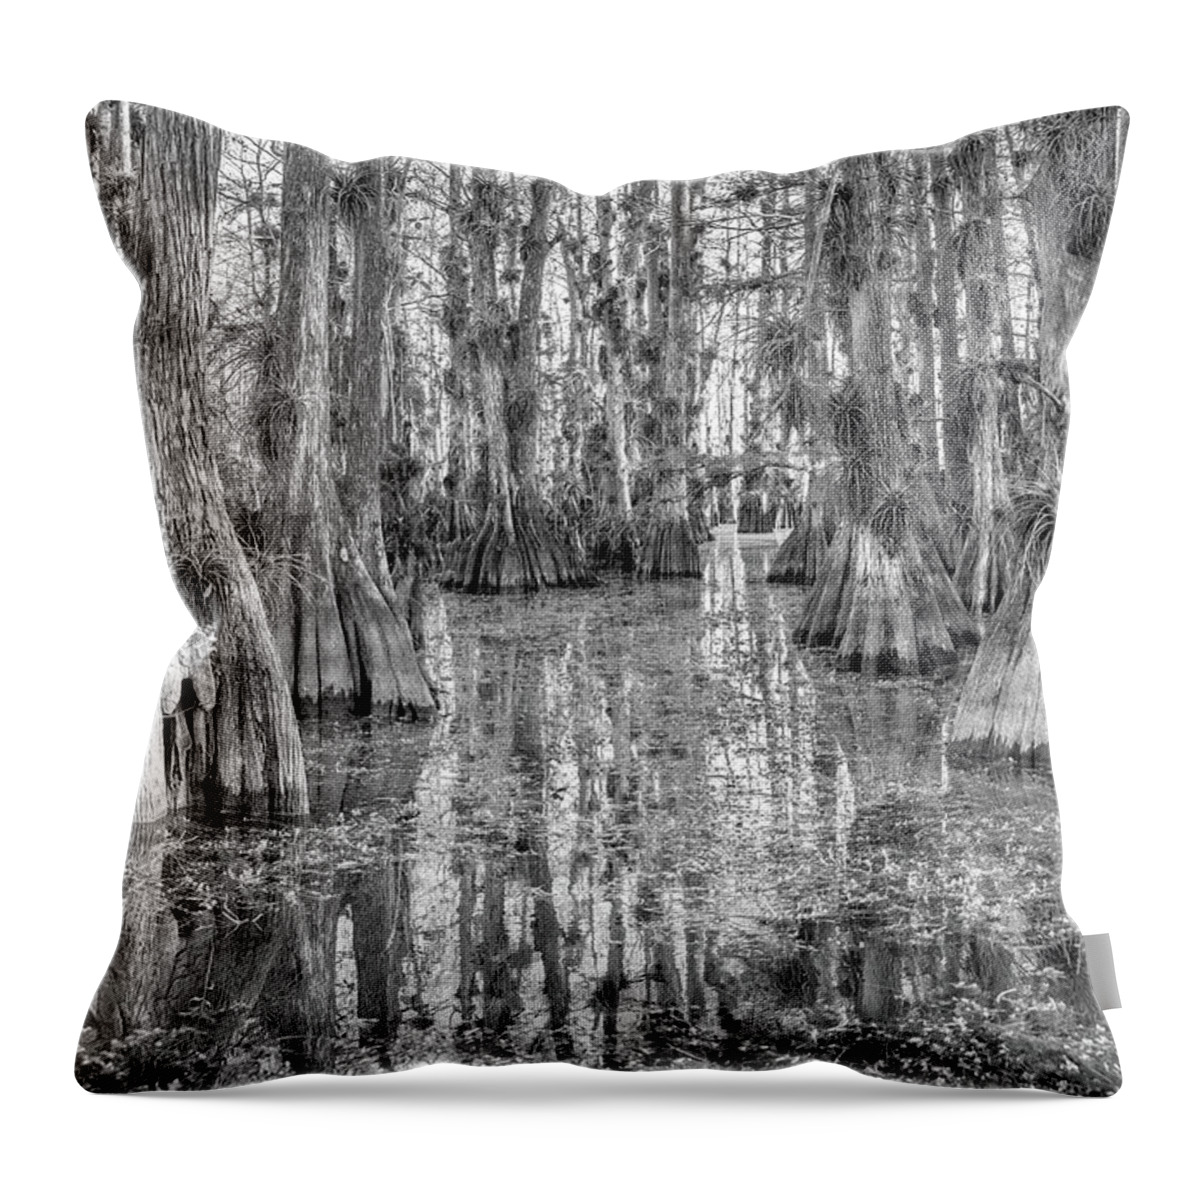 Big Cypress National Preserve Throw Pillow featuring the photograph Morning @ Gator Hook by Rudy Wilms